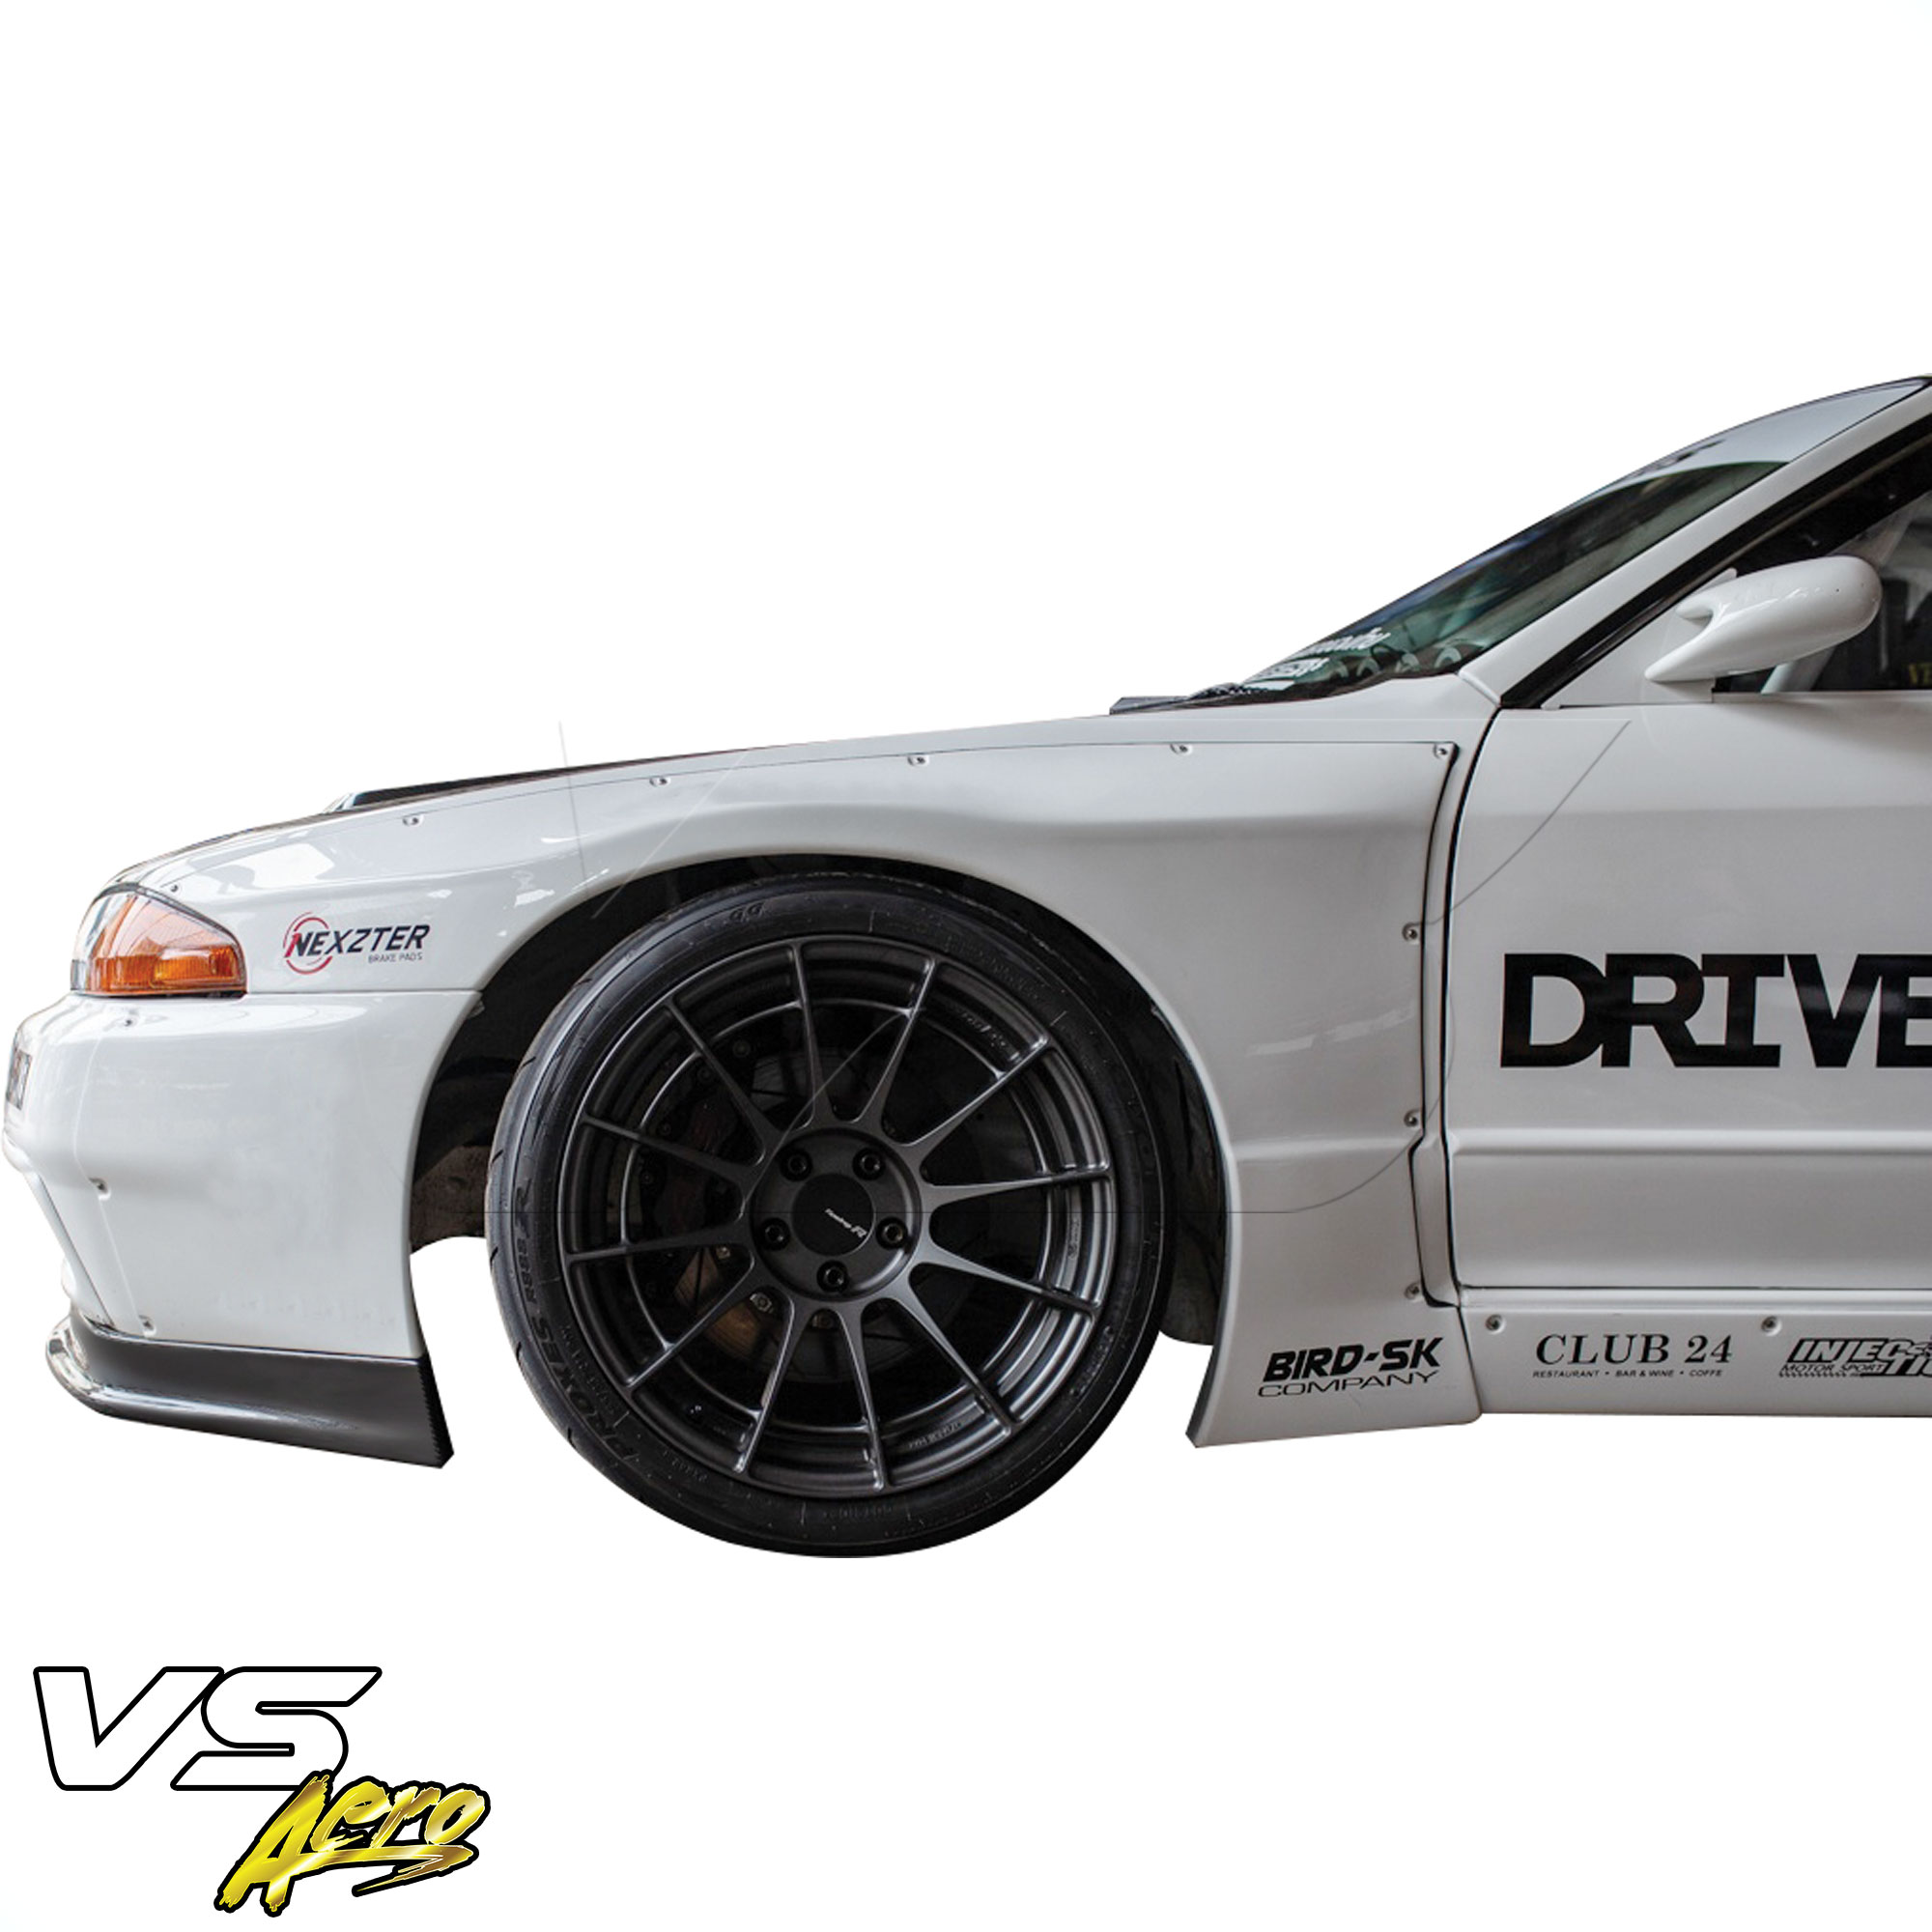 VSaero FRP TKYO Wide Body 40mm Fender Flares (front) 4pc > Nissan Skyline R32 1990-1994 > 2dr Coupe - Image 6